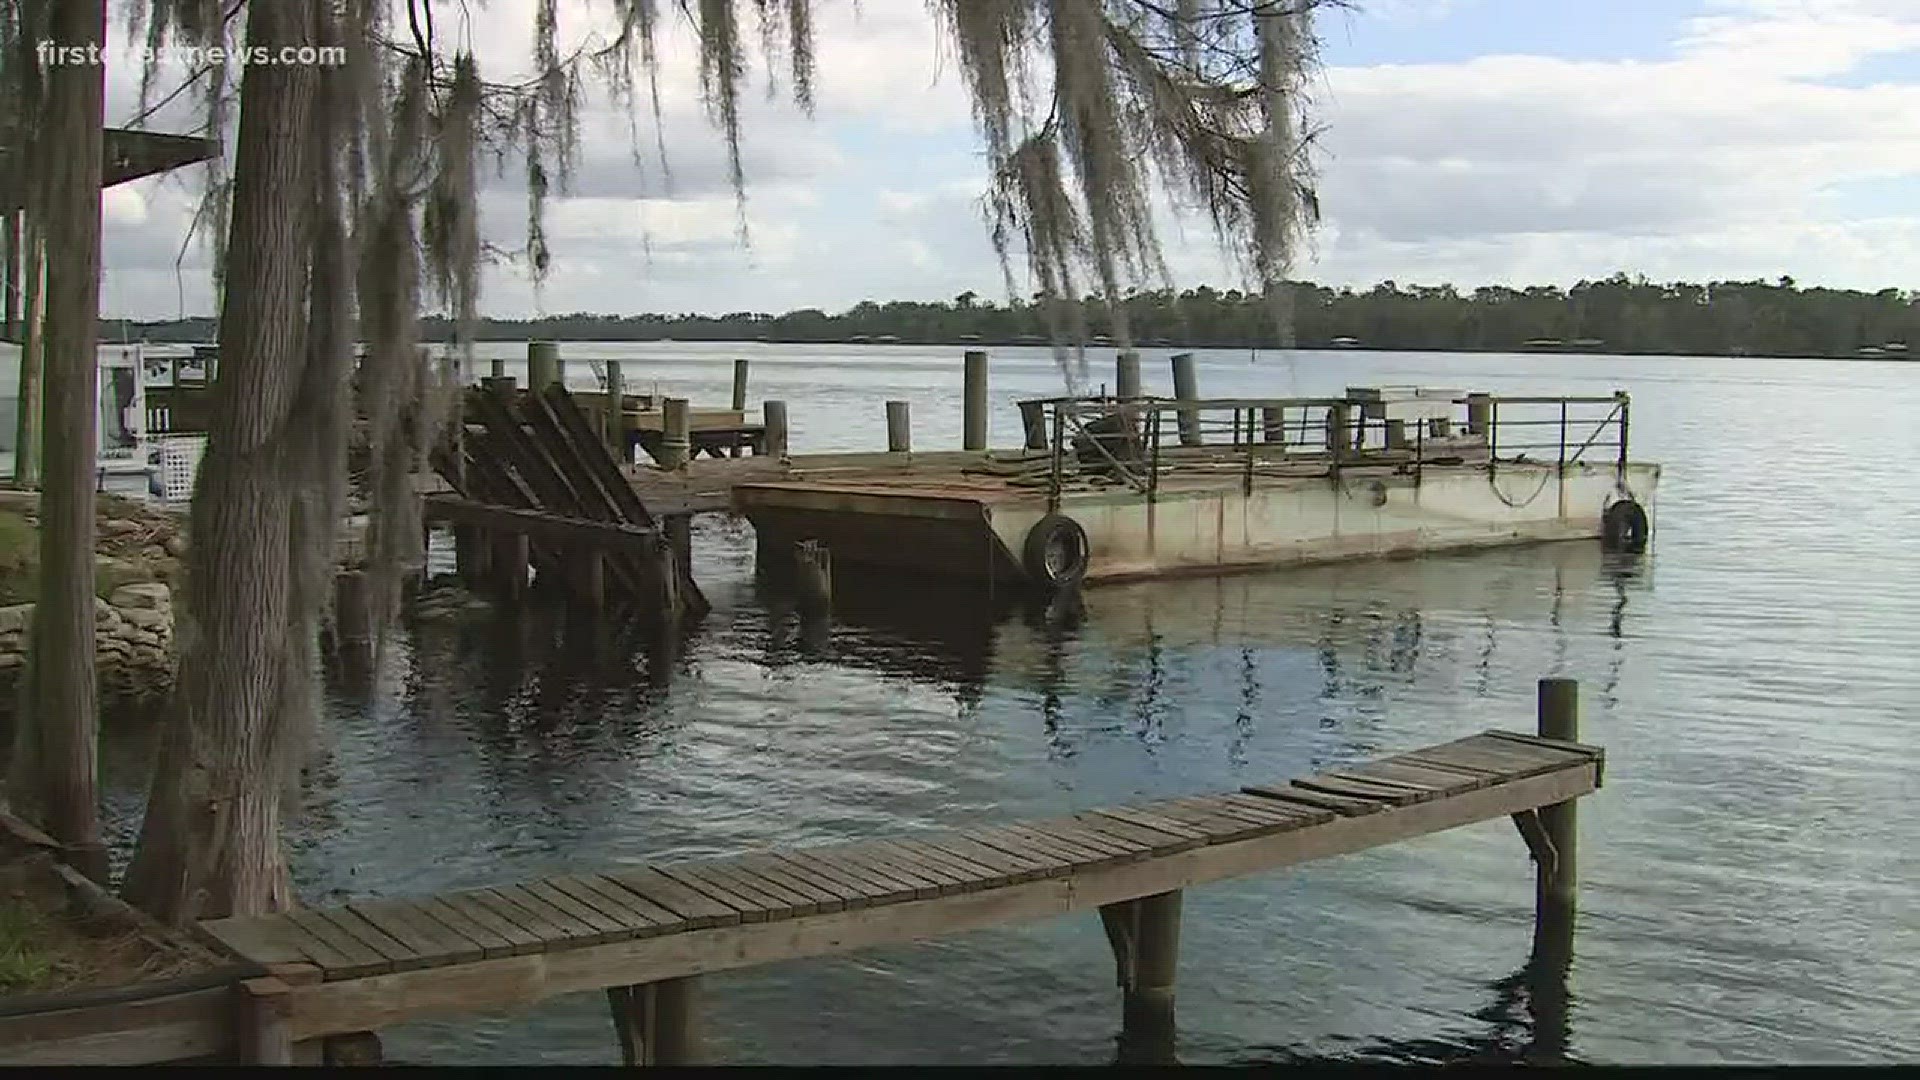 Fort Gates Ferry connects Putnam County to the Ocala Forest, when it is work. During Hurricane Irma its loading ramp was destroyed and the ferry has been down since.